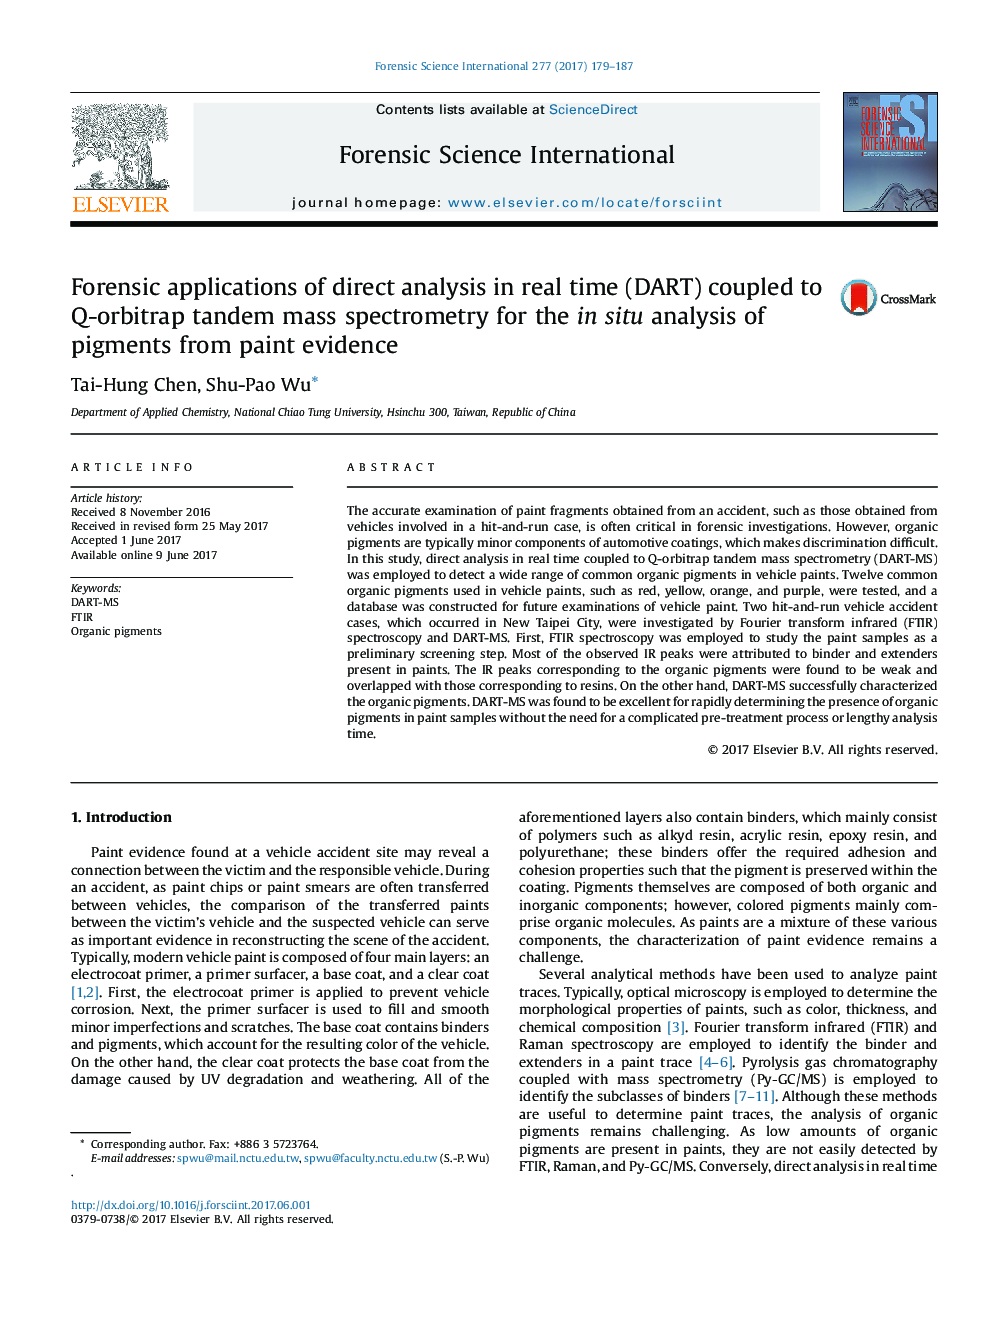 Forensic applications of direct analysis in real time (DART) coupled to Q-orbitrap tandem mass spectrometry for the in situ analysis of pigments from paint evidence